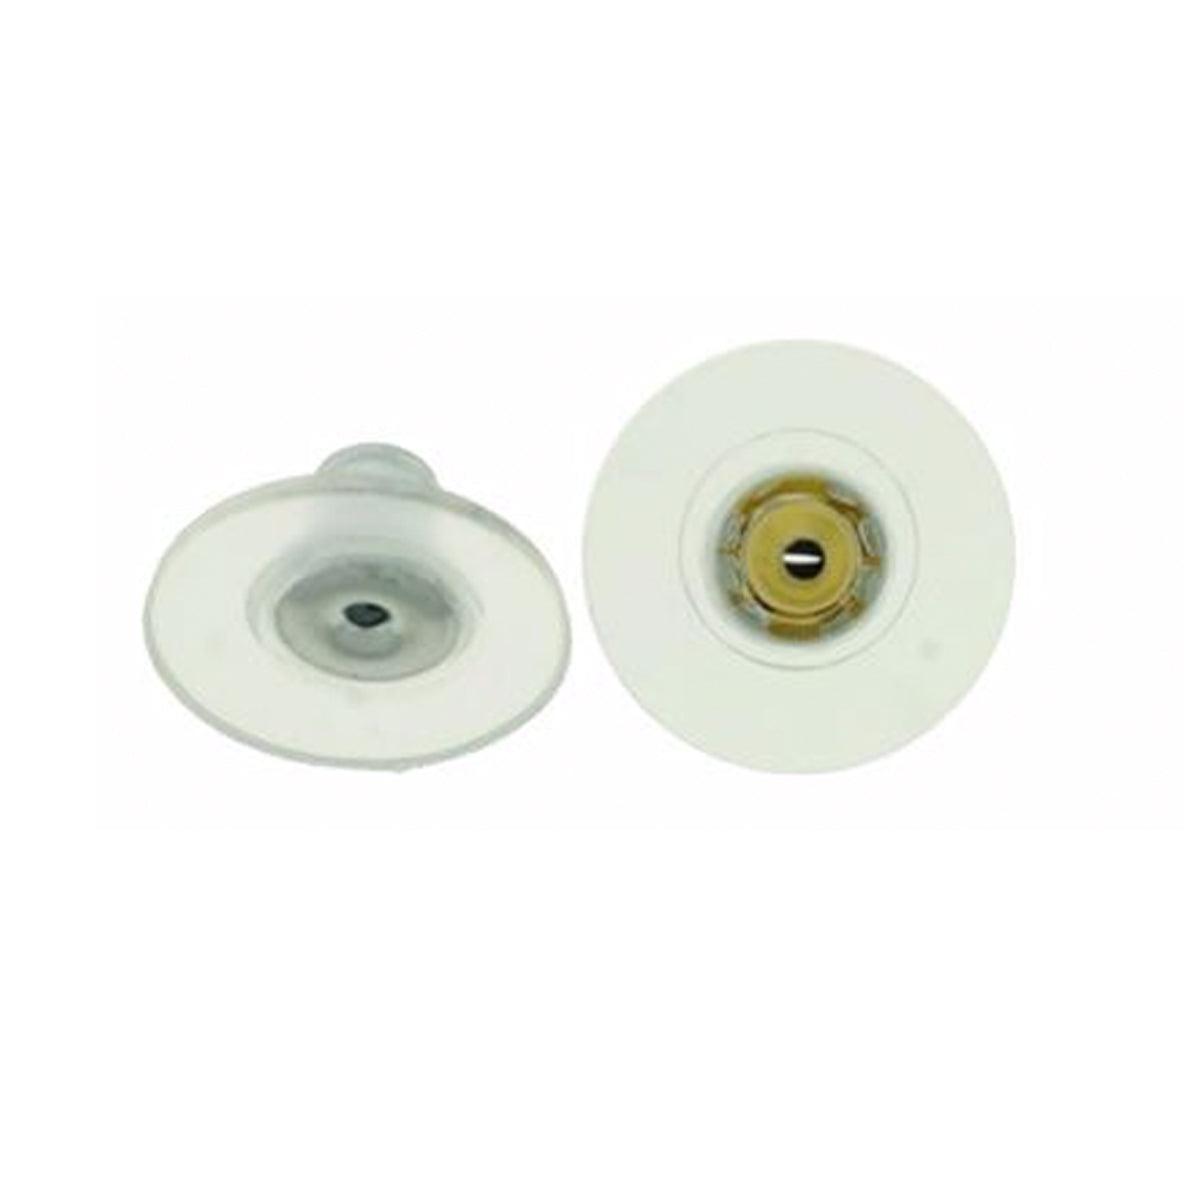 http://www.ottofrei.com/cdn/shop/files/white-plated-and-yellow-plated-friction-earring-backs-with-plastic-support-pads-packs-of-144-otto-frei_9797a263-cd17-408c-9086-cc31d4314583.jpg?v=1689358889